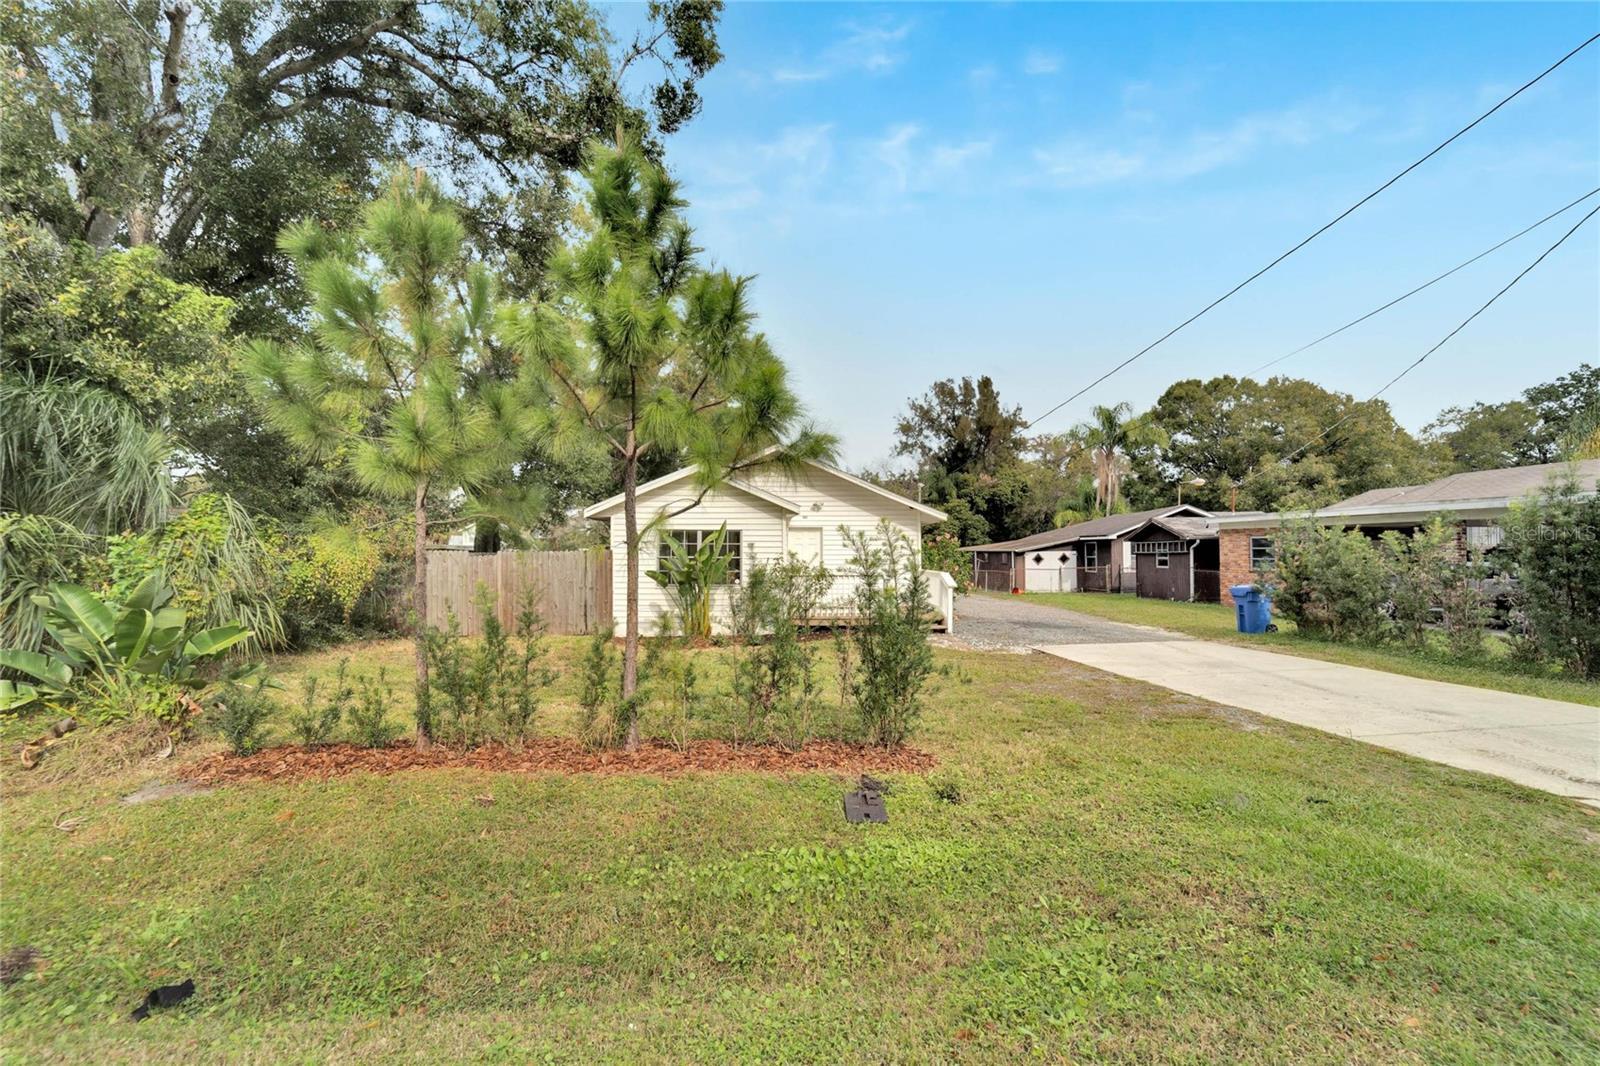 Photo one of 5606 Palm River Rd Tampa FL 33619 | MLS T3492558